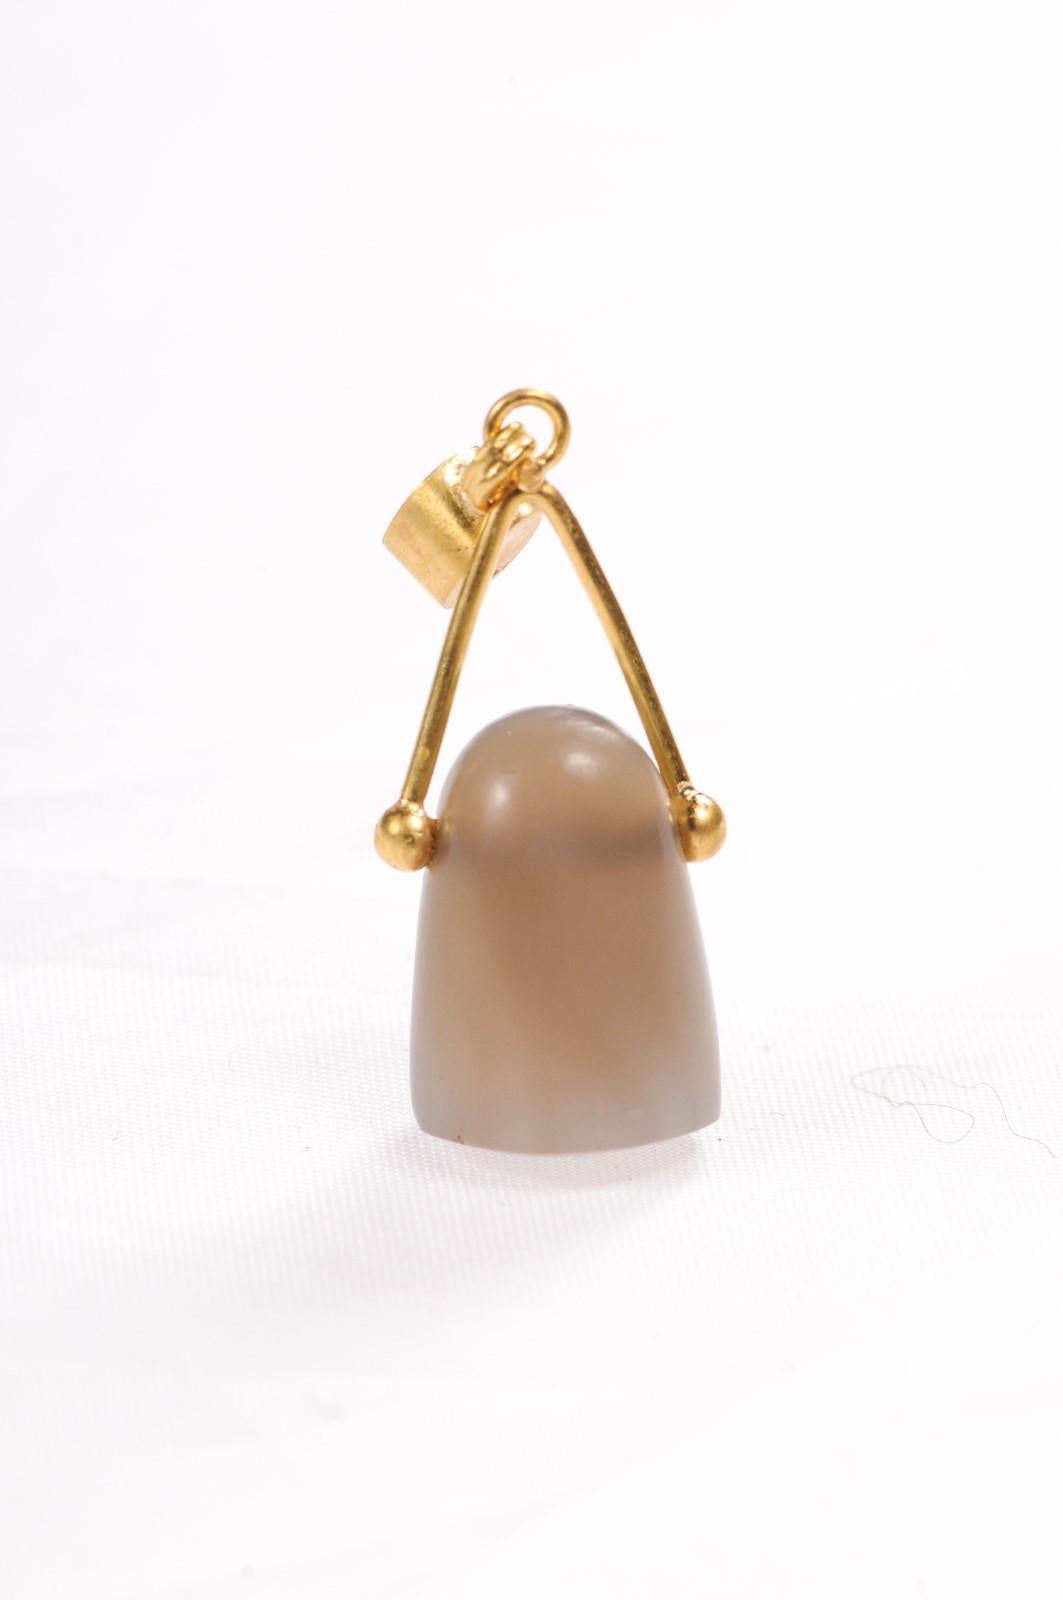 Ancient Chalcedony Seal Pendant (pendant only) For Sale 7